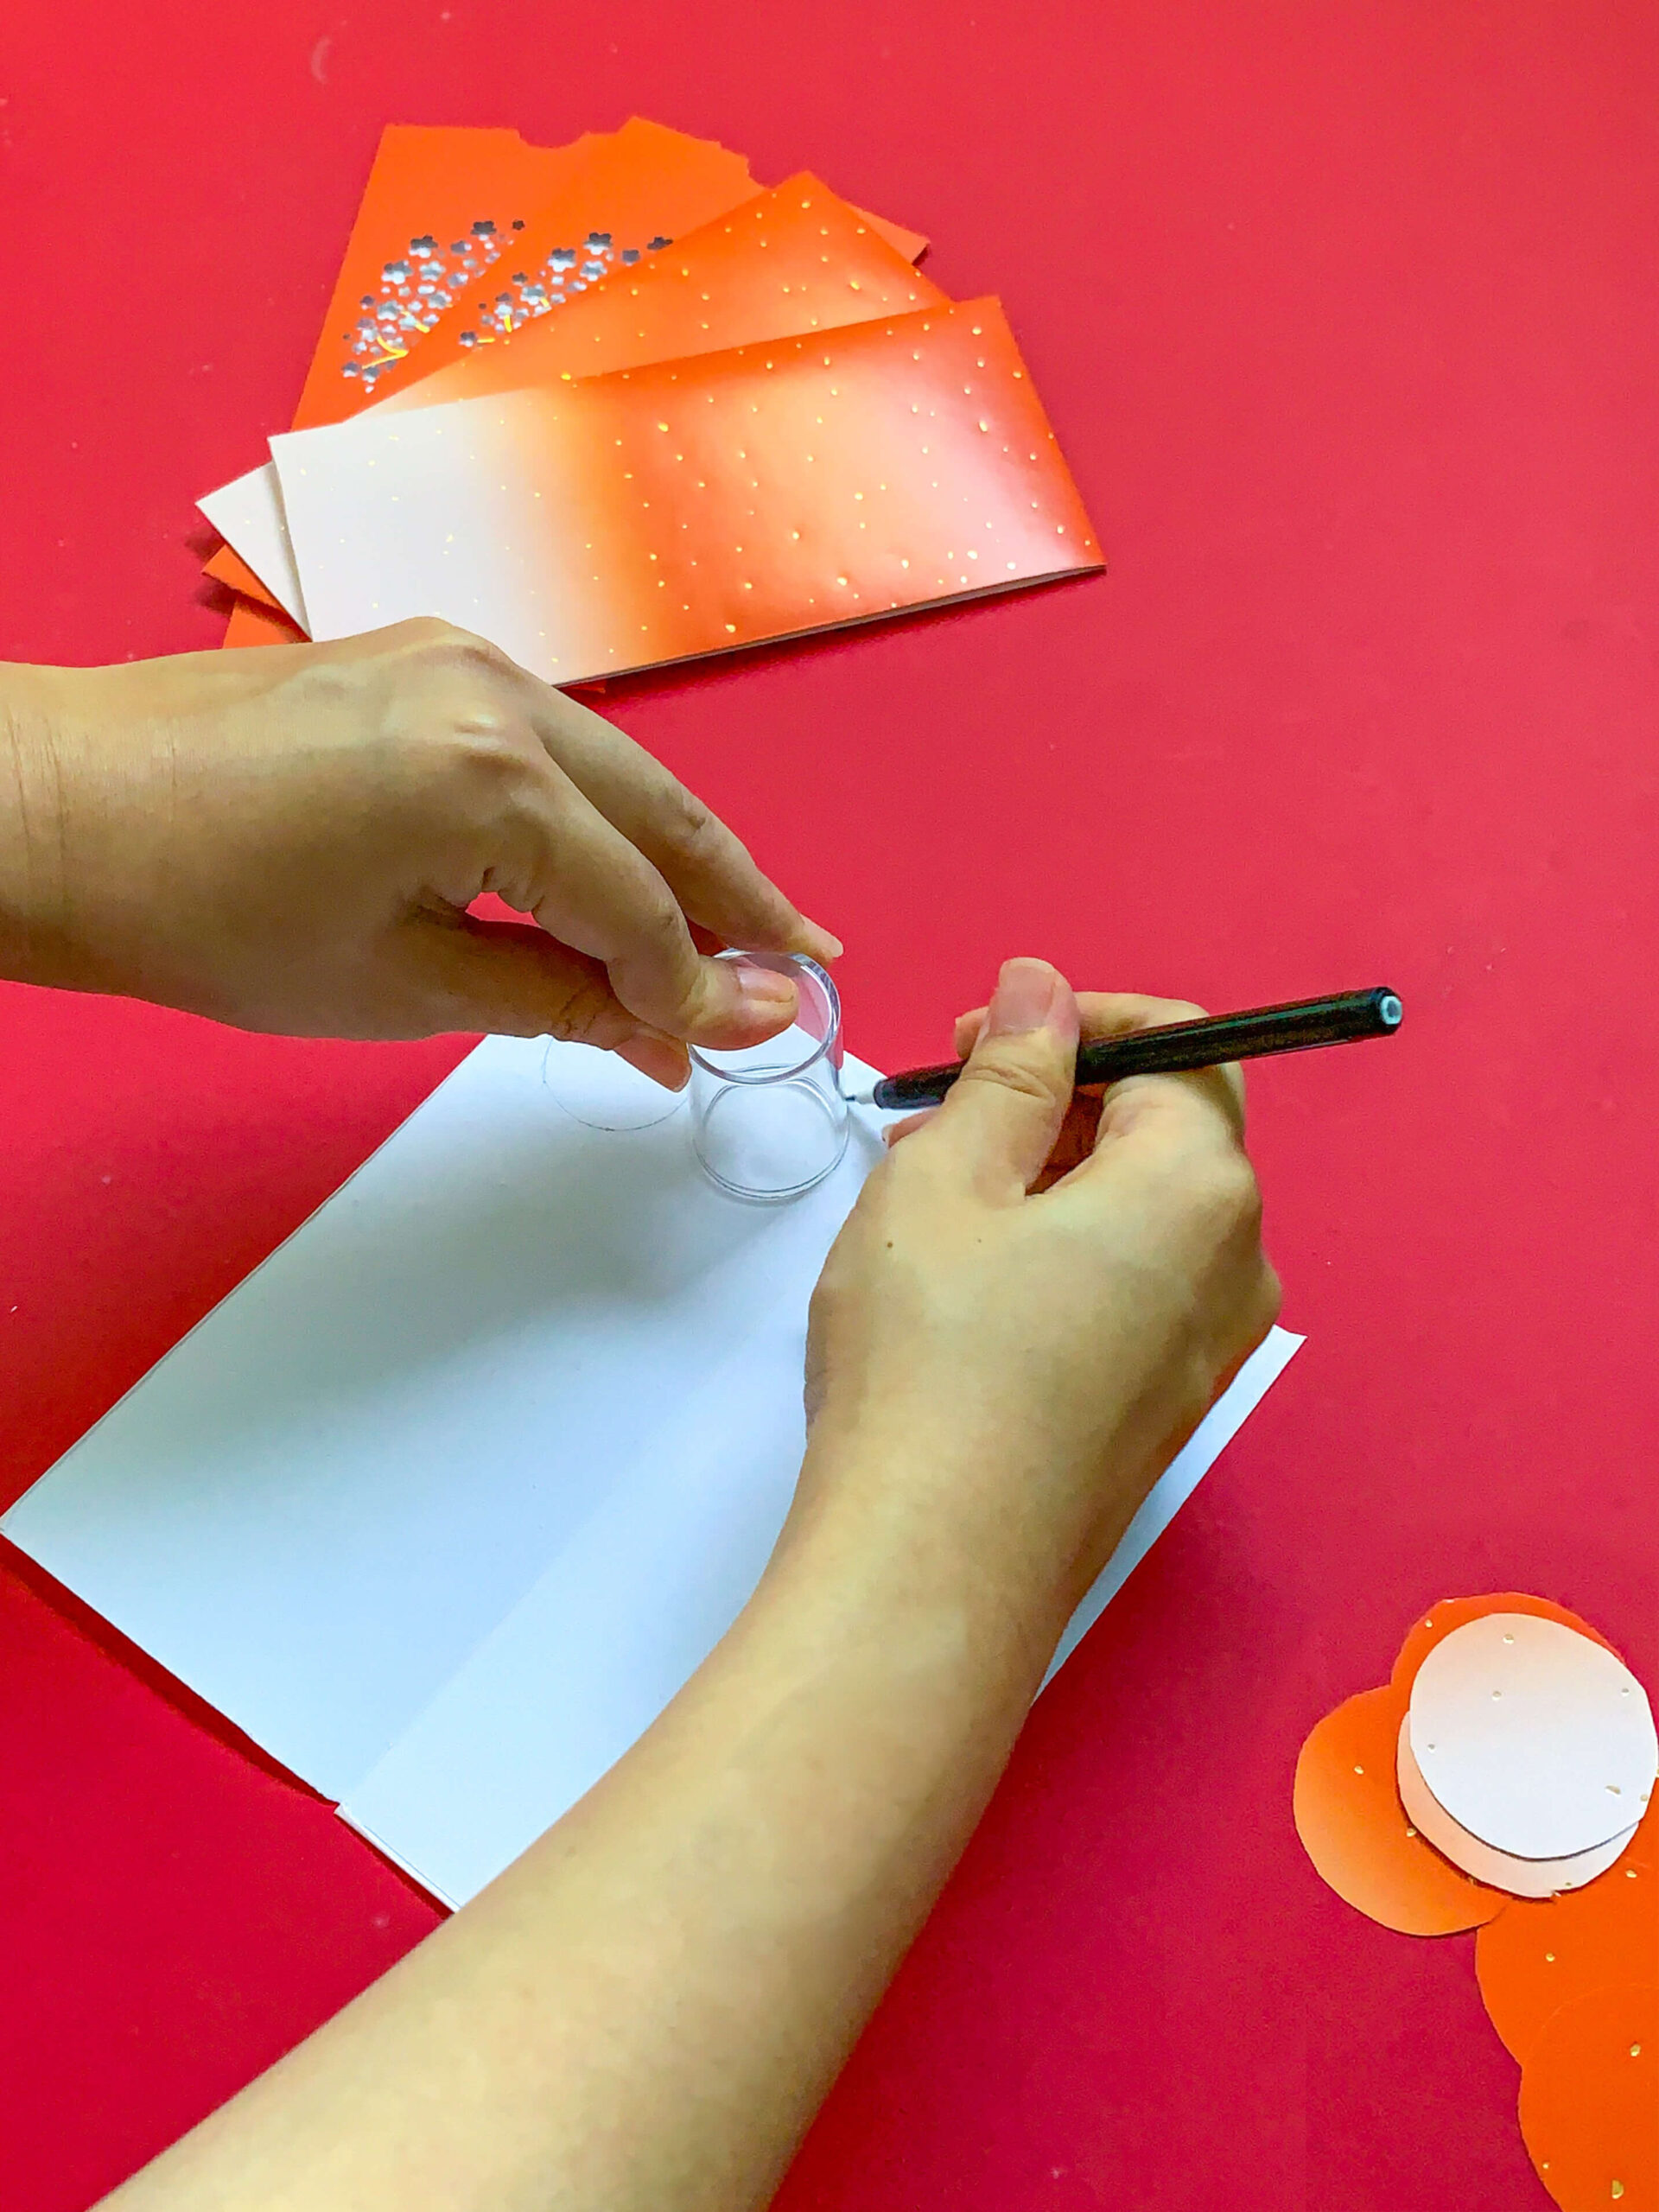 Pineapple Tart CNY DIY Craft - Tracing on Reused Ang Pows Paper Money Envelopes